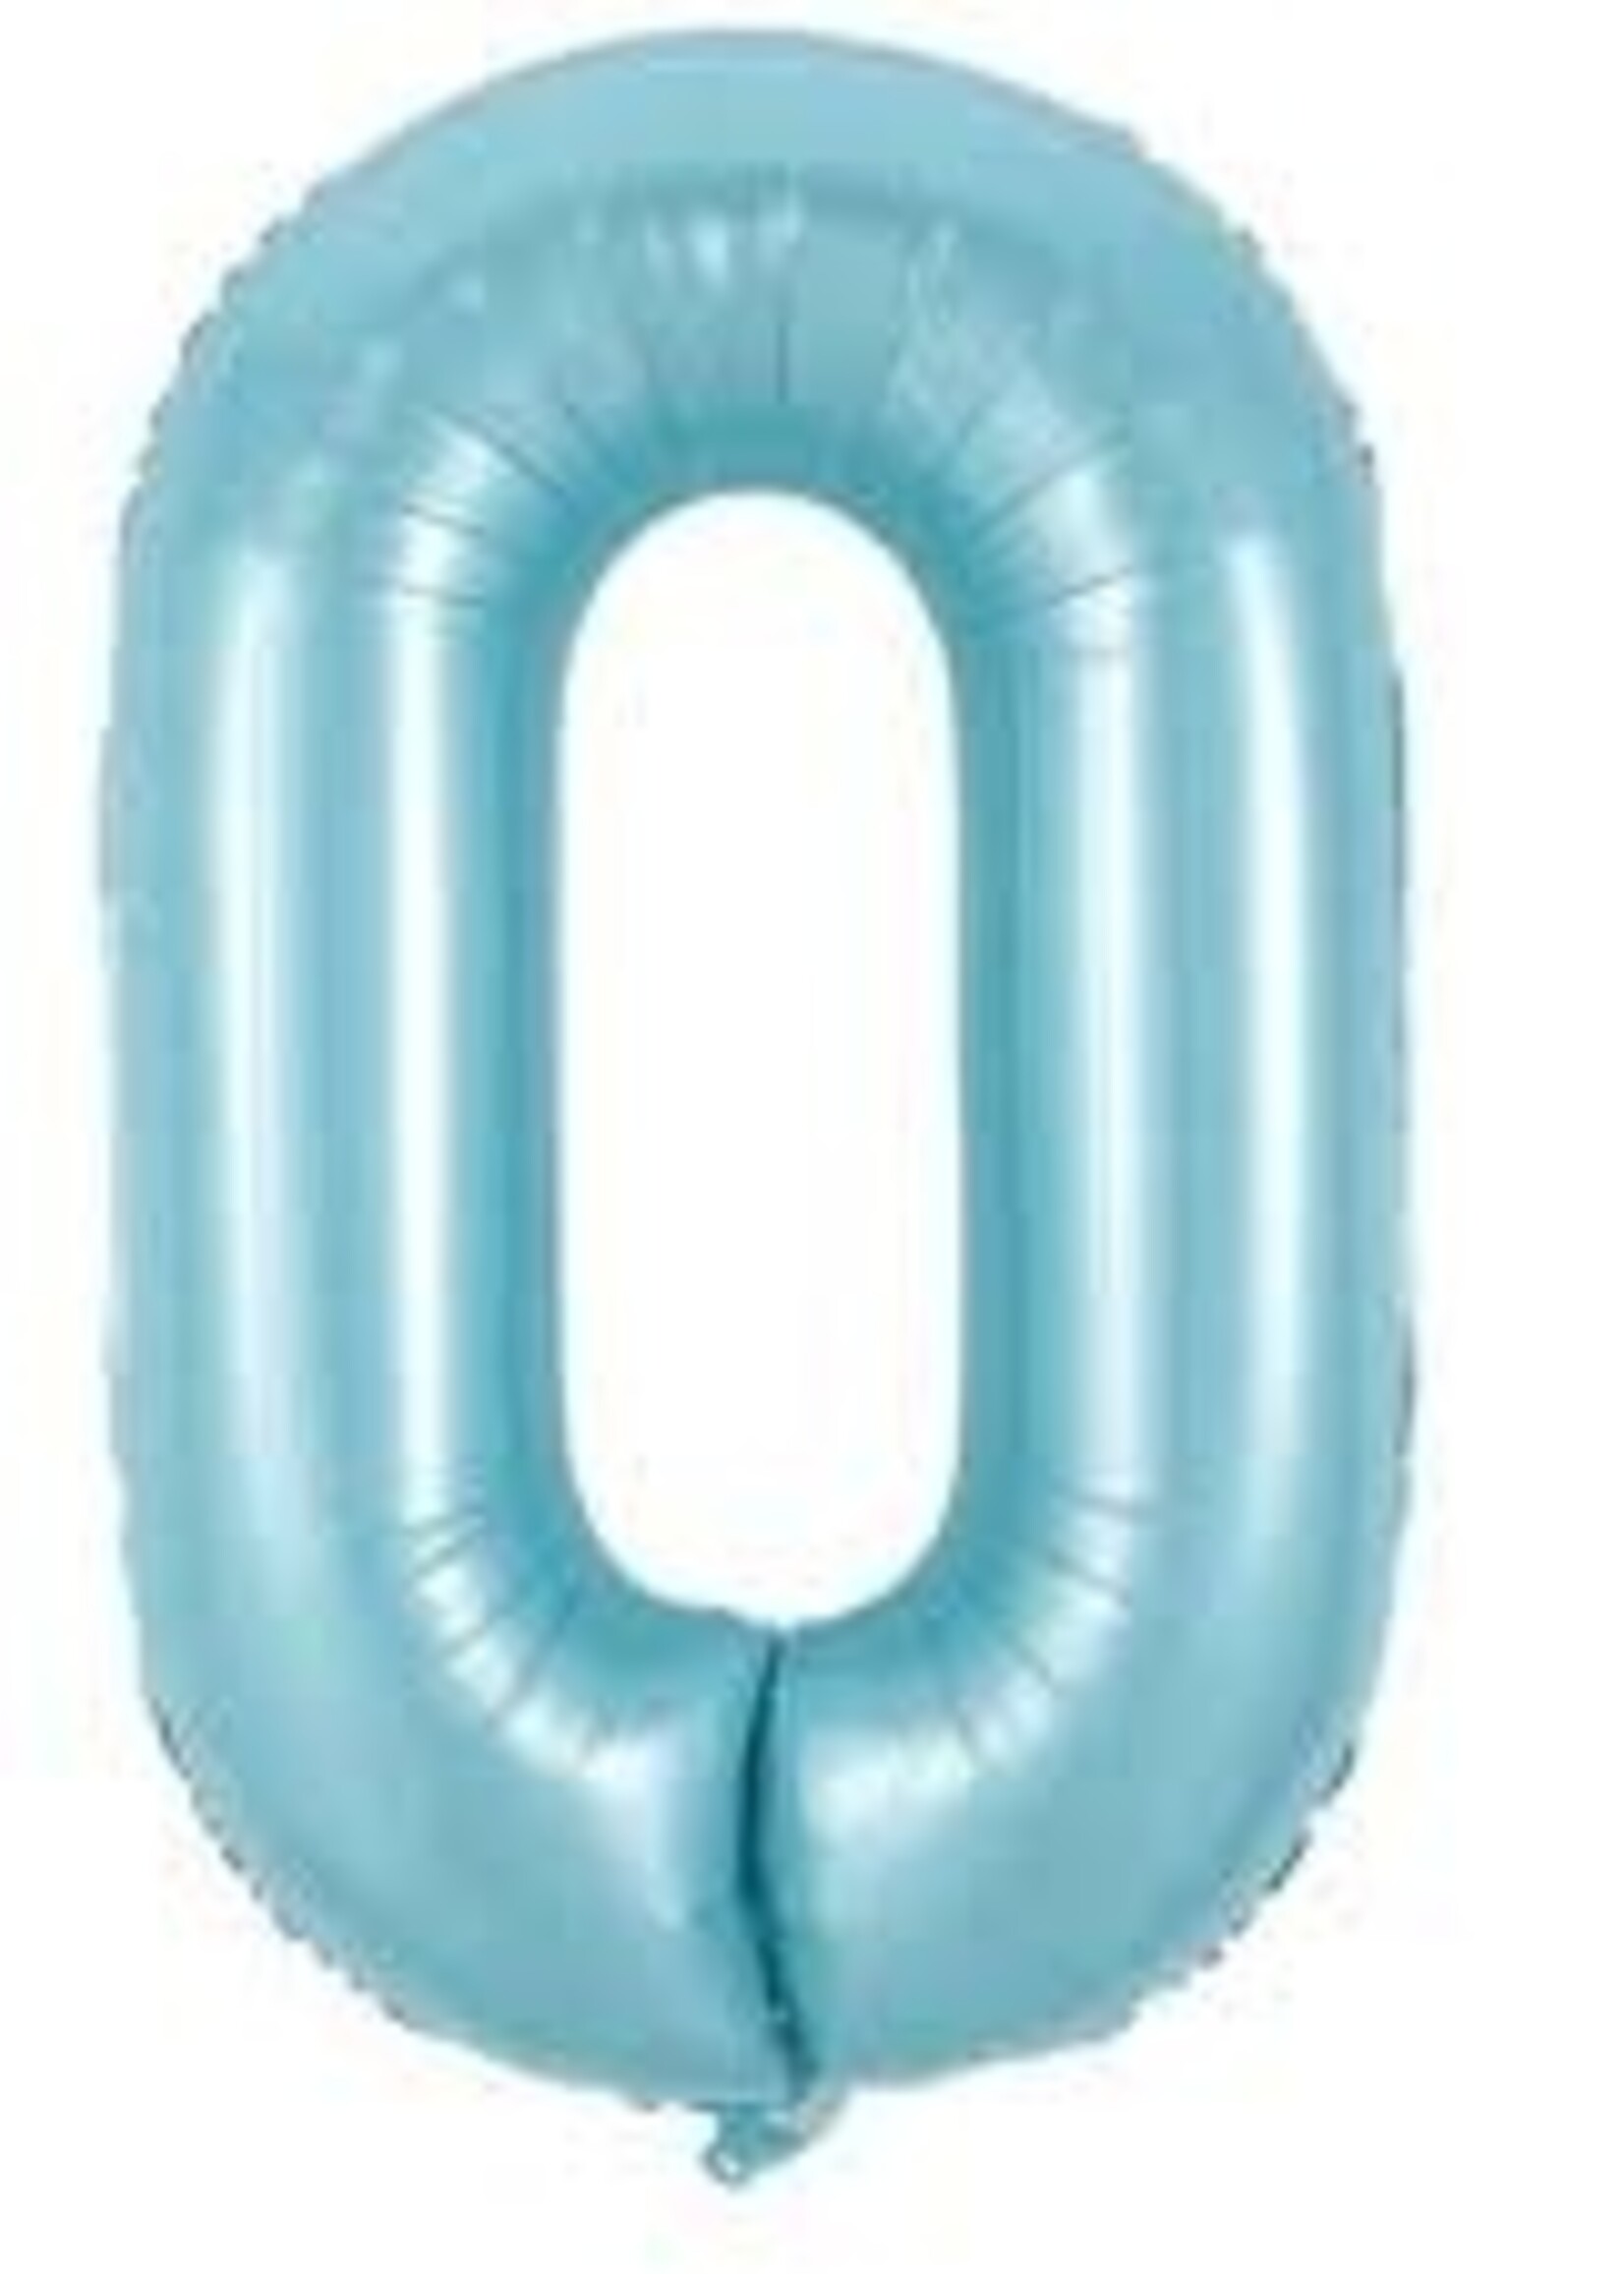 0 BABY BLUE NUMBER BALLOON